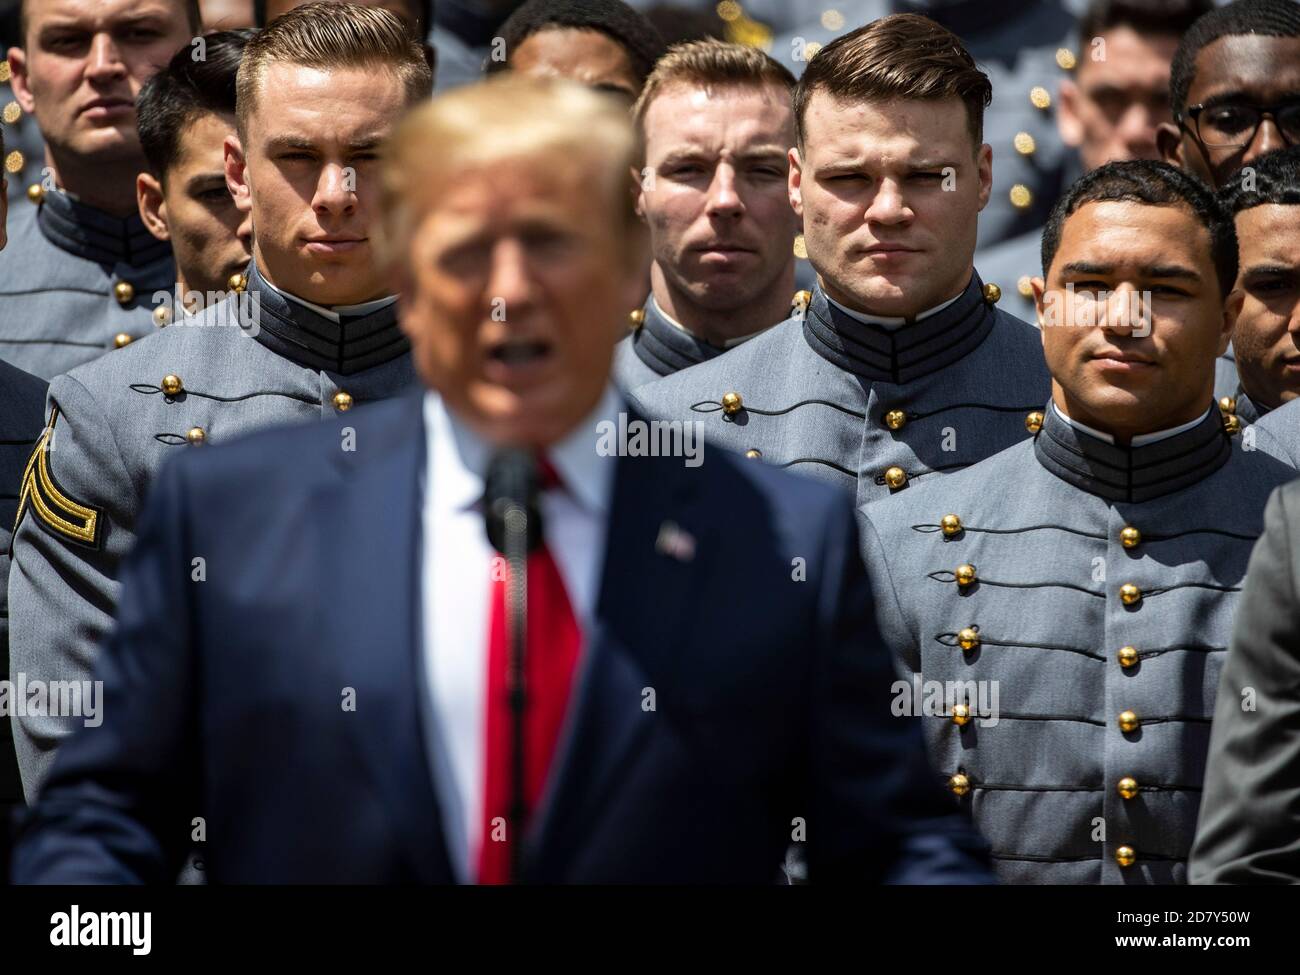 Cadets from the U.S. Military Academy look on U.S. President Donald Trump delivers remarks prior to presenting the Commander-in-Chief’s trophy to the team in the White House Rose Garden in Washington, D.C. on Monday, May 6, 2019. Credit: Alex Edelman/The Photo Access Stock Photo